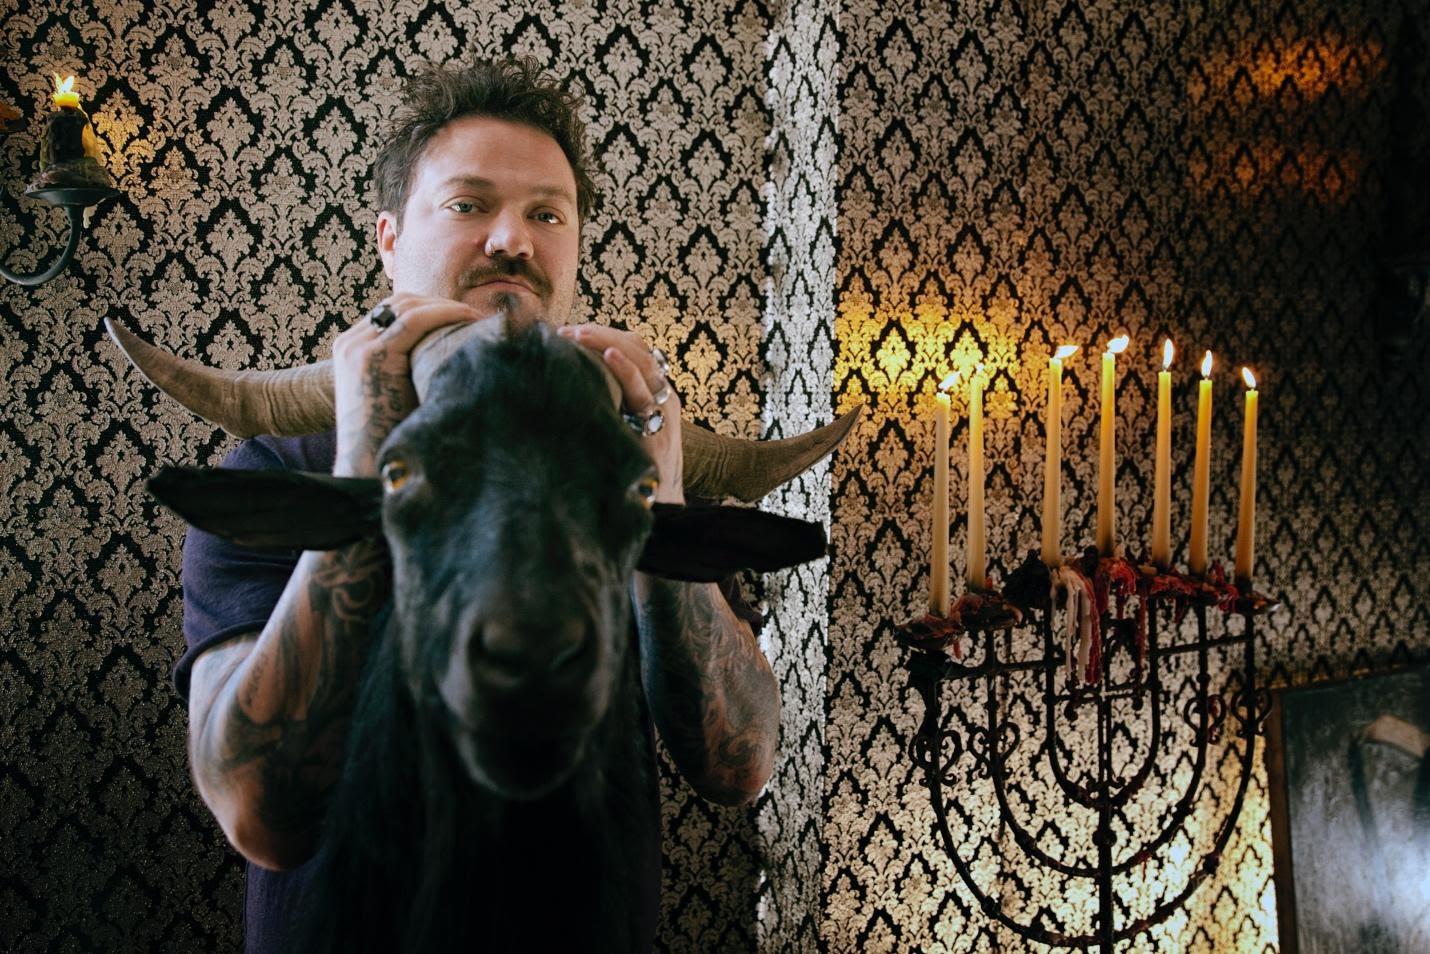 Bam Margera with a goat taxidermy